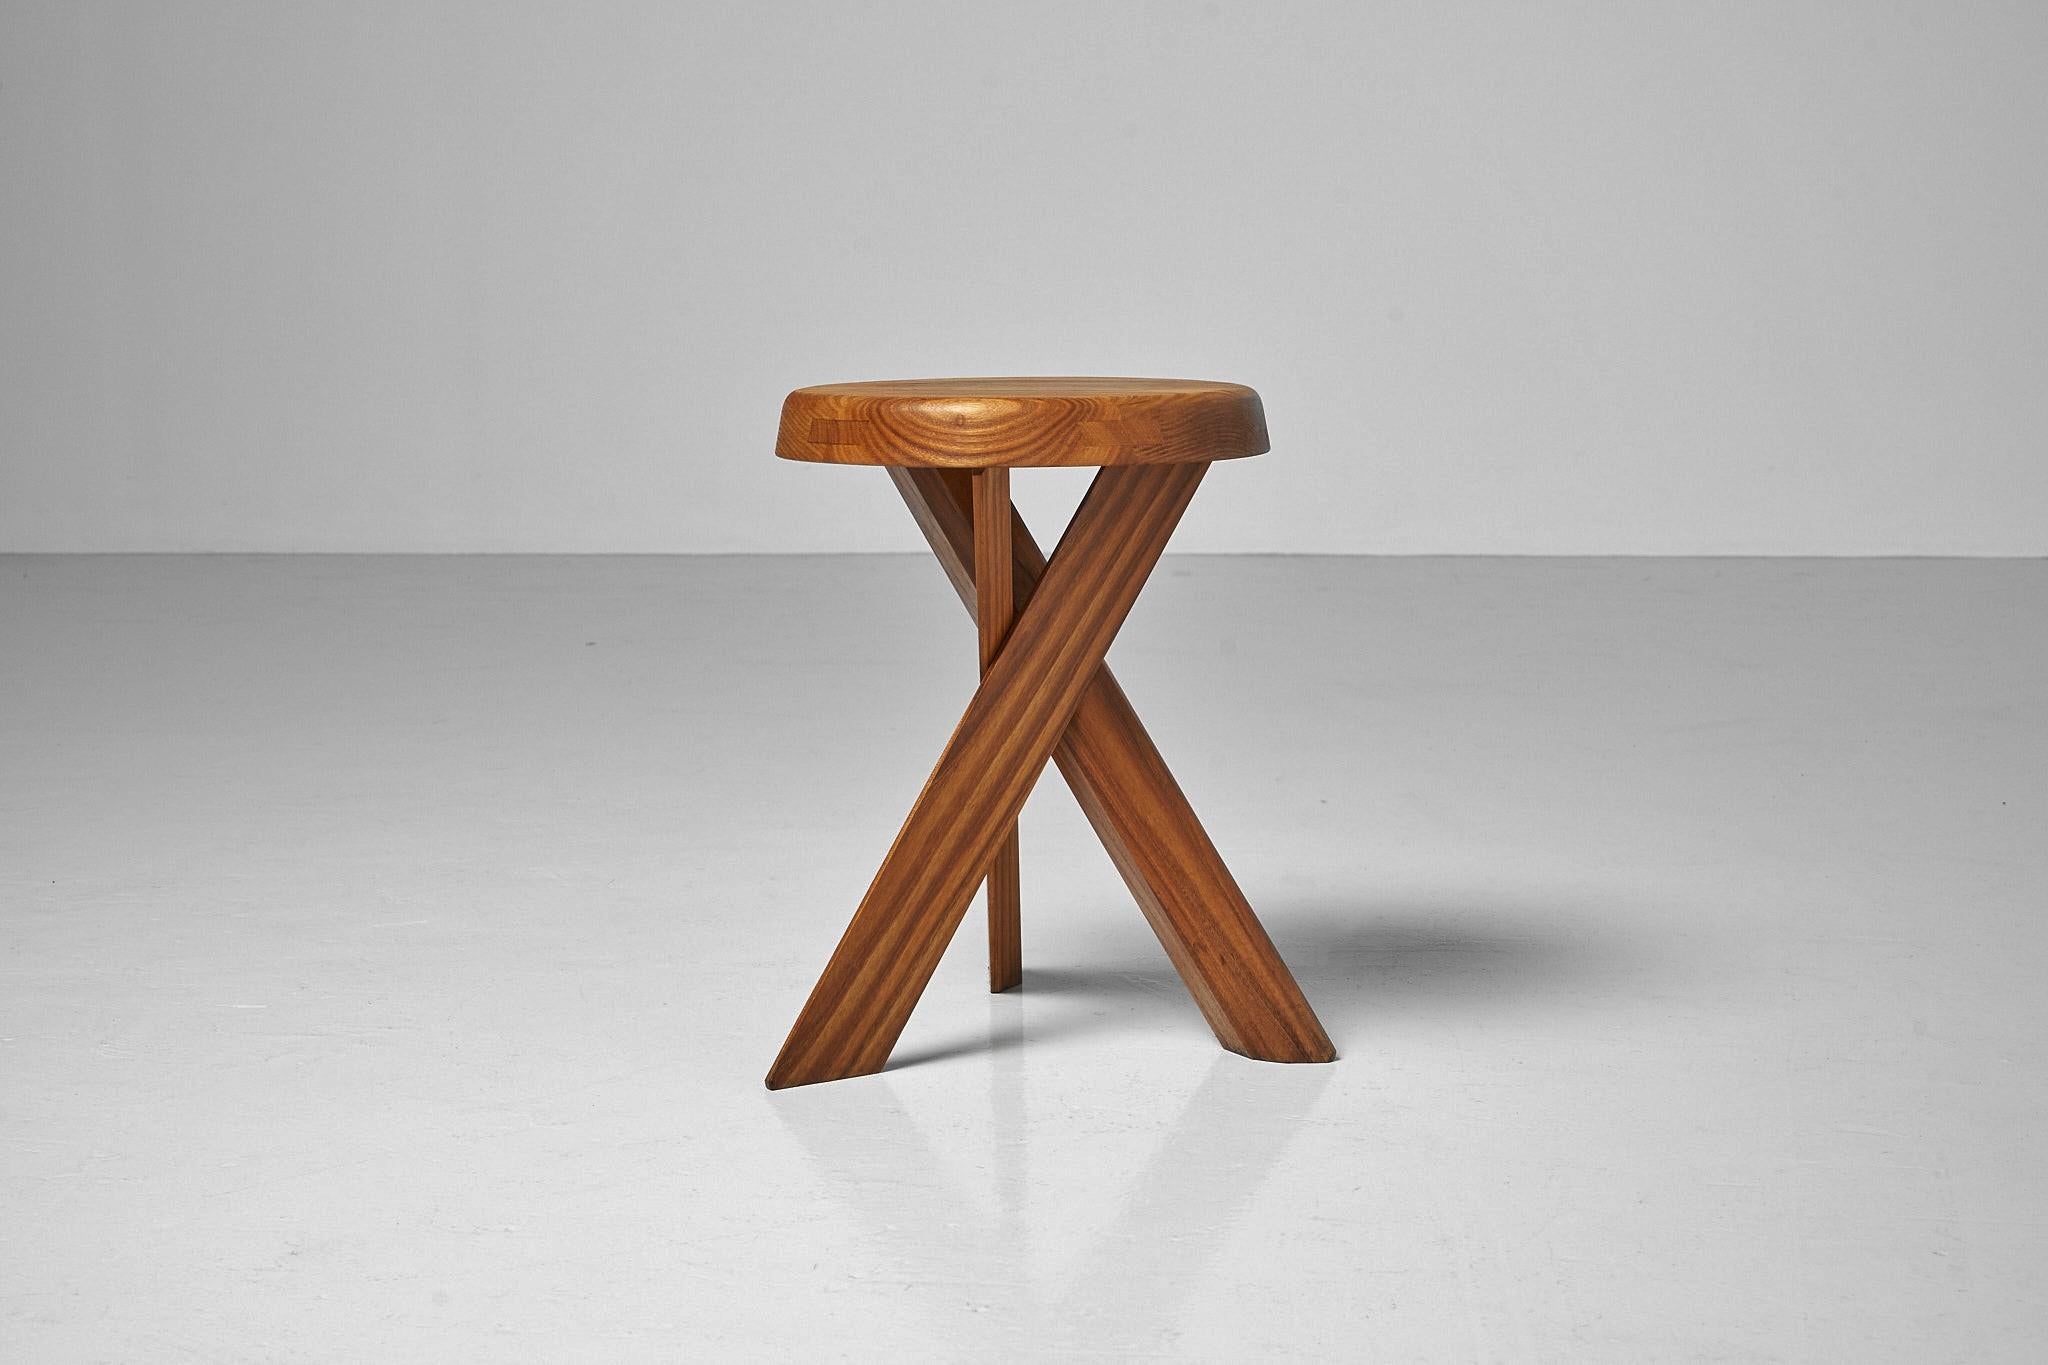 Sculptural iconic model  S31A stool designed by Pierre Chapo and manufactured in his own workshop, France 1970s. This stool is made of solid elmwood has very nice constructed seat. The wood-joint connections of the crossed table legs are a typical